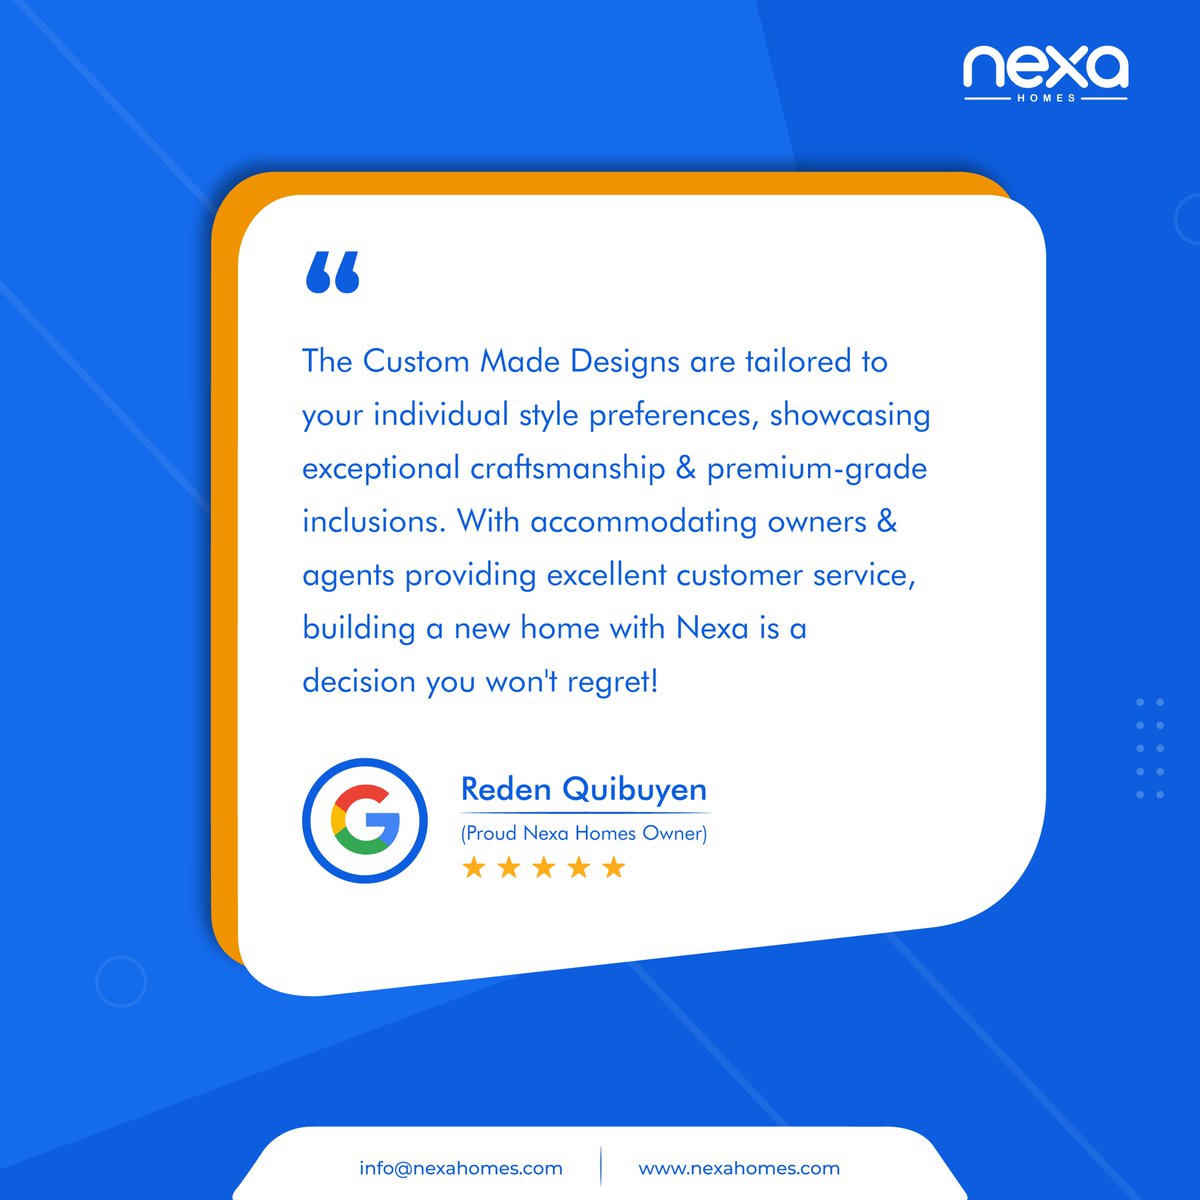 Another happy and proud Nexa Homes Owner with satisfaction in their living space. At Nexa Homes, we are relentlessly striving to make our work better and provide excellent results to our clientele.⭐️⭐️⭐️⭐️⭐️

#googlereview #customerreview #CustomerTestimonial #customhomes